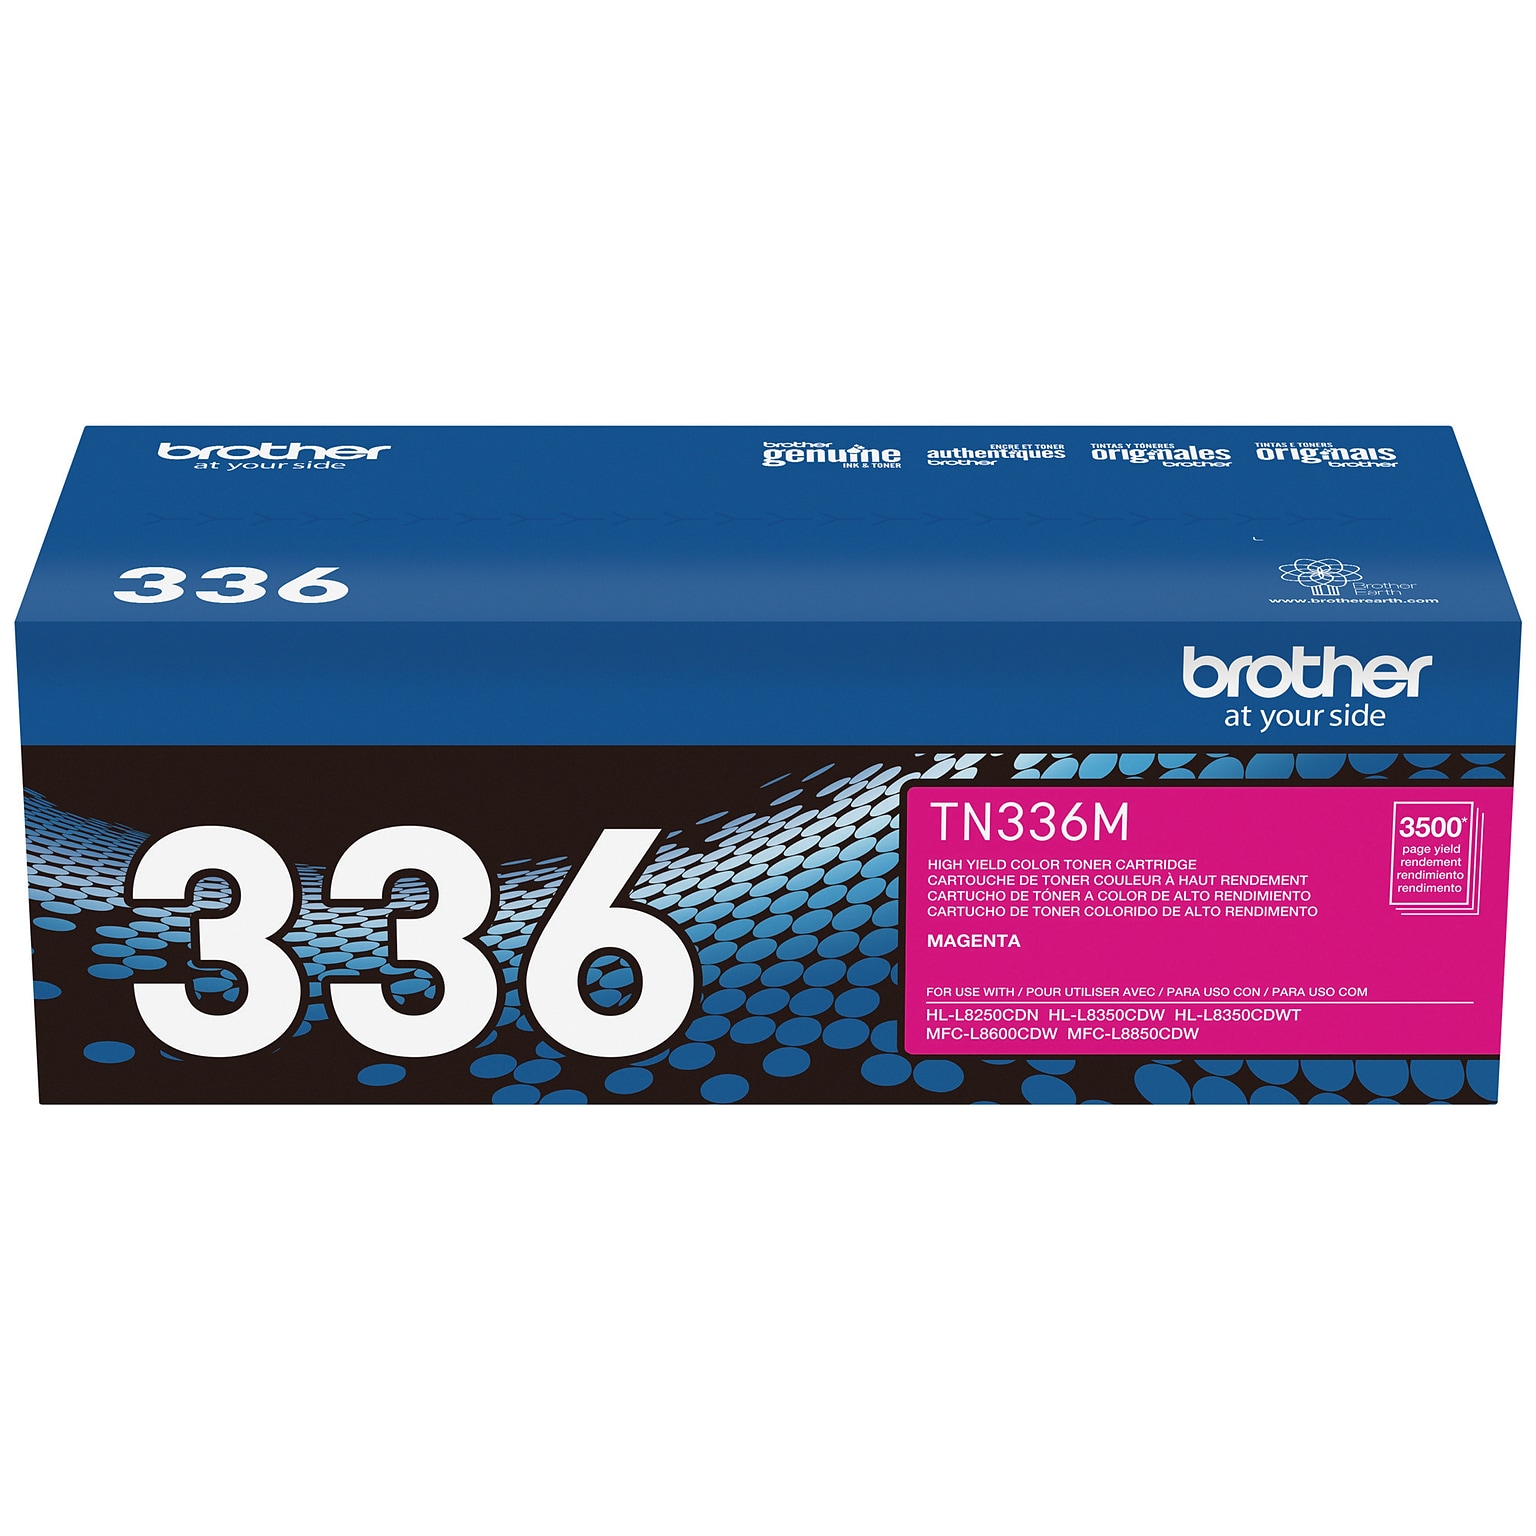 Brother TN-336 Magenta High Yield Toner Cartridge, Print Up to 3,500 Pages (TN336M)